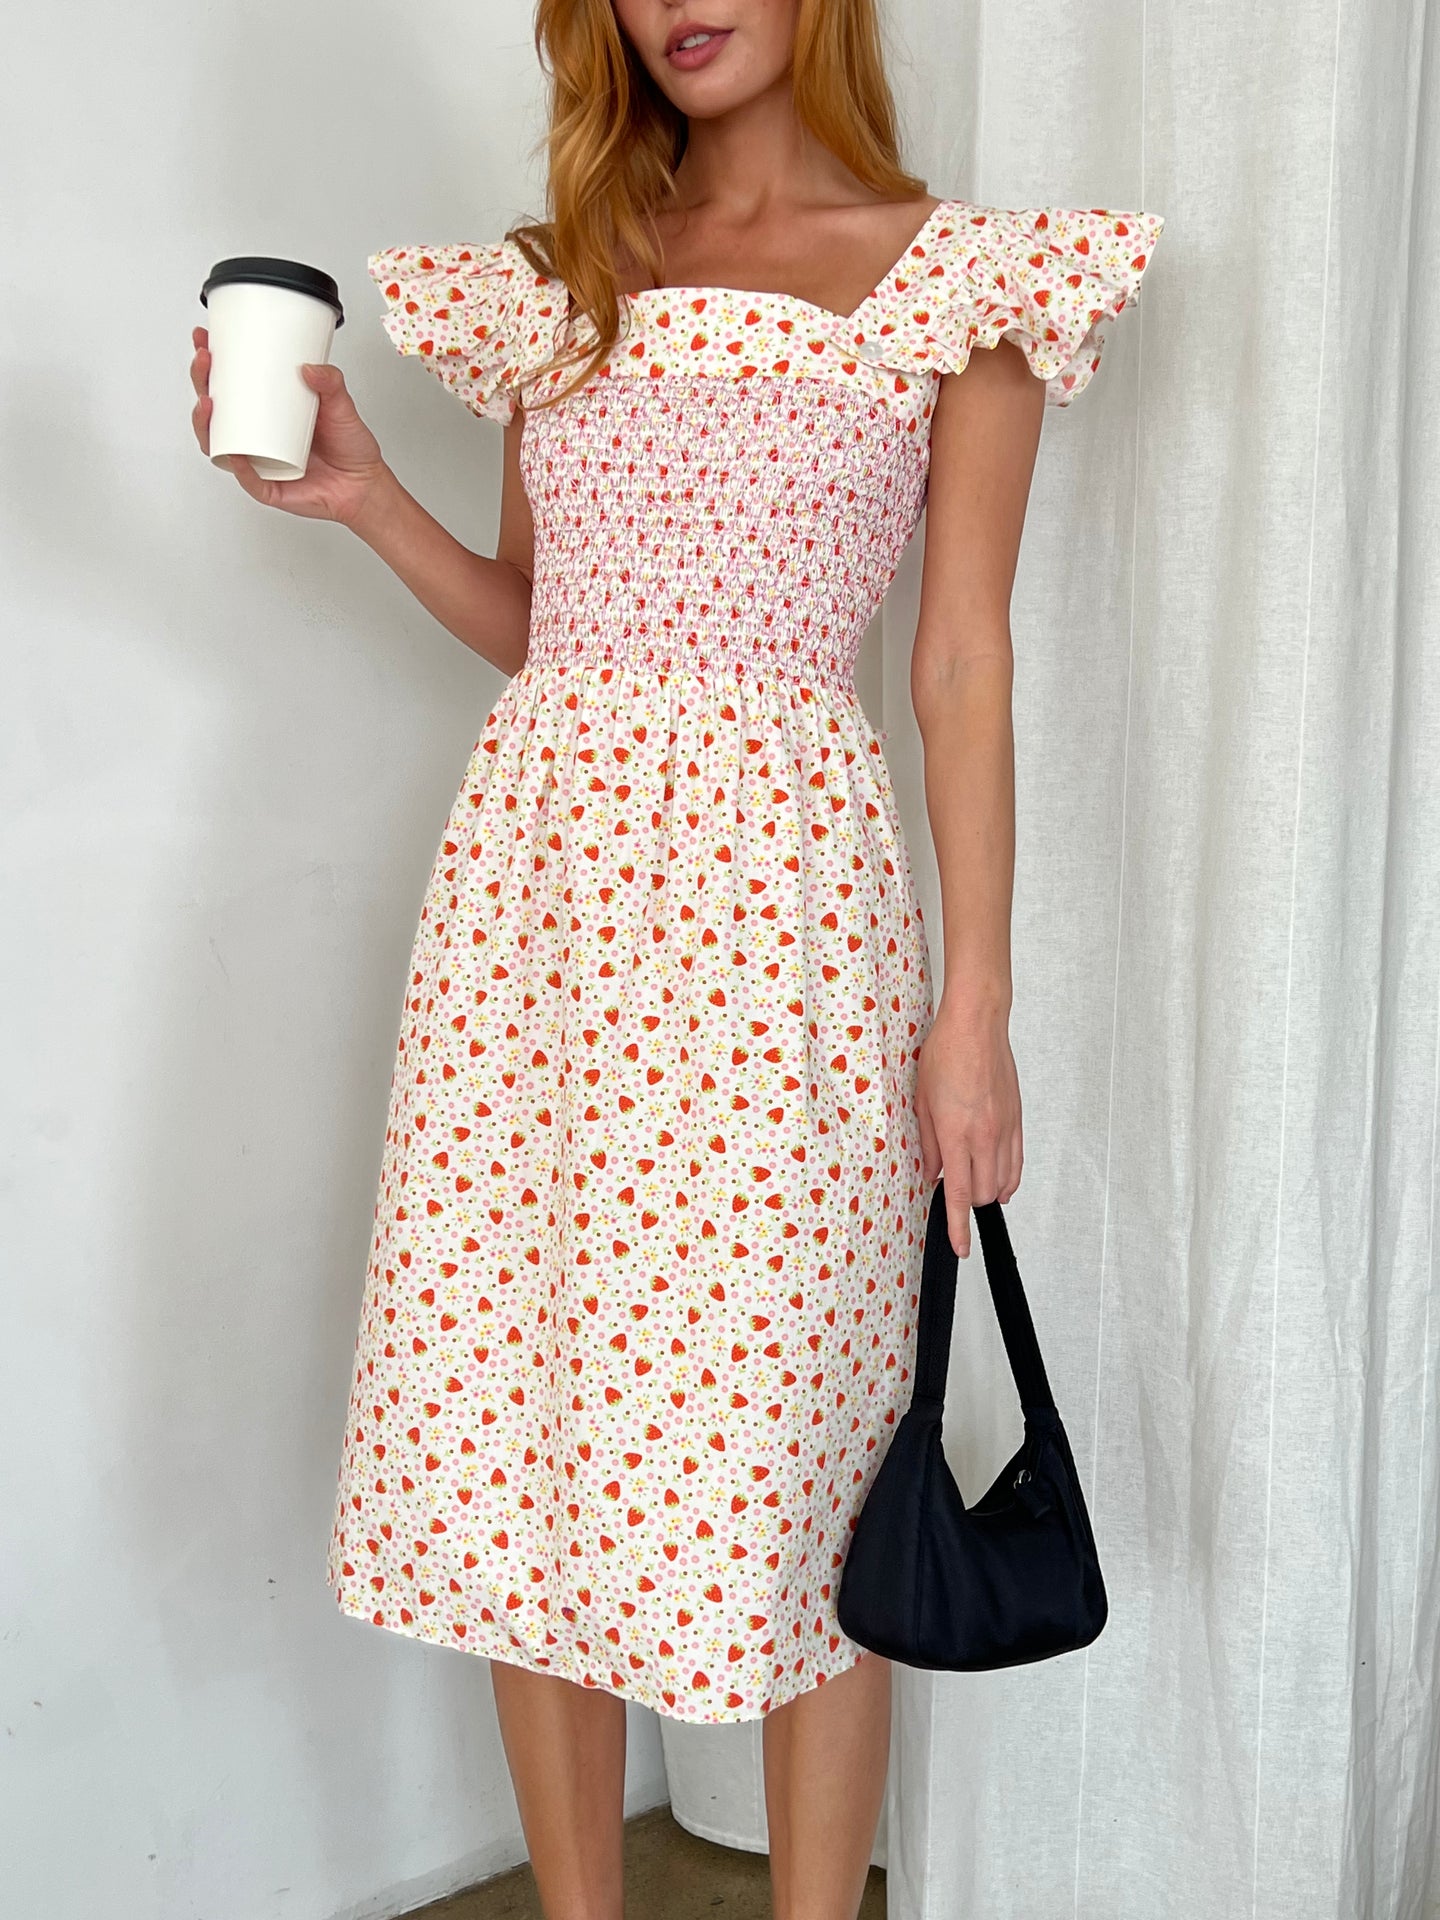 Noella Dress in Ditsy Strawberry Floral